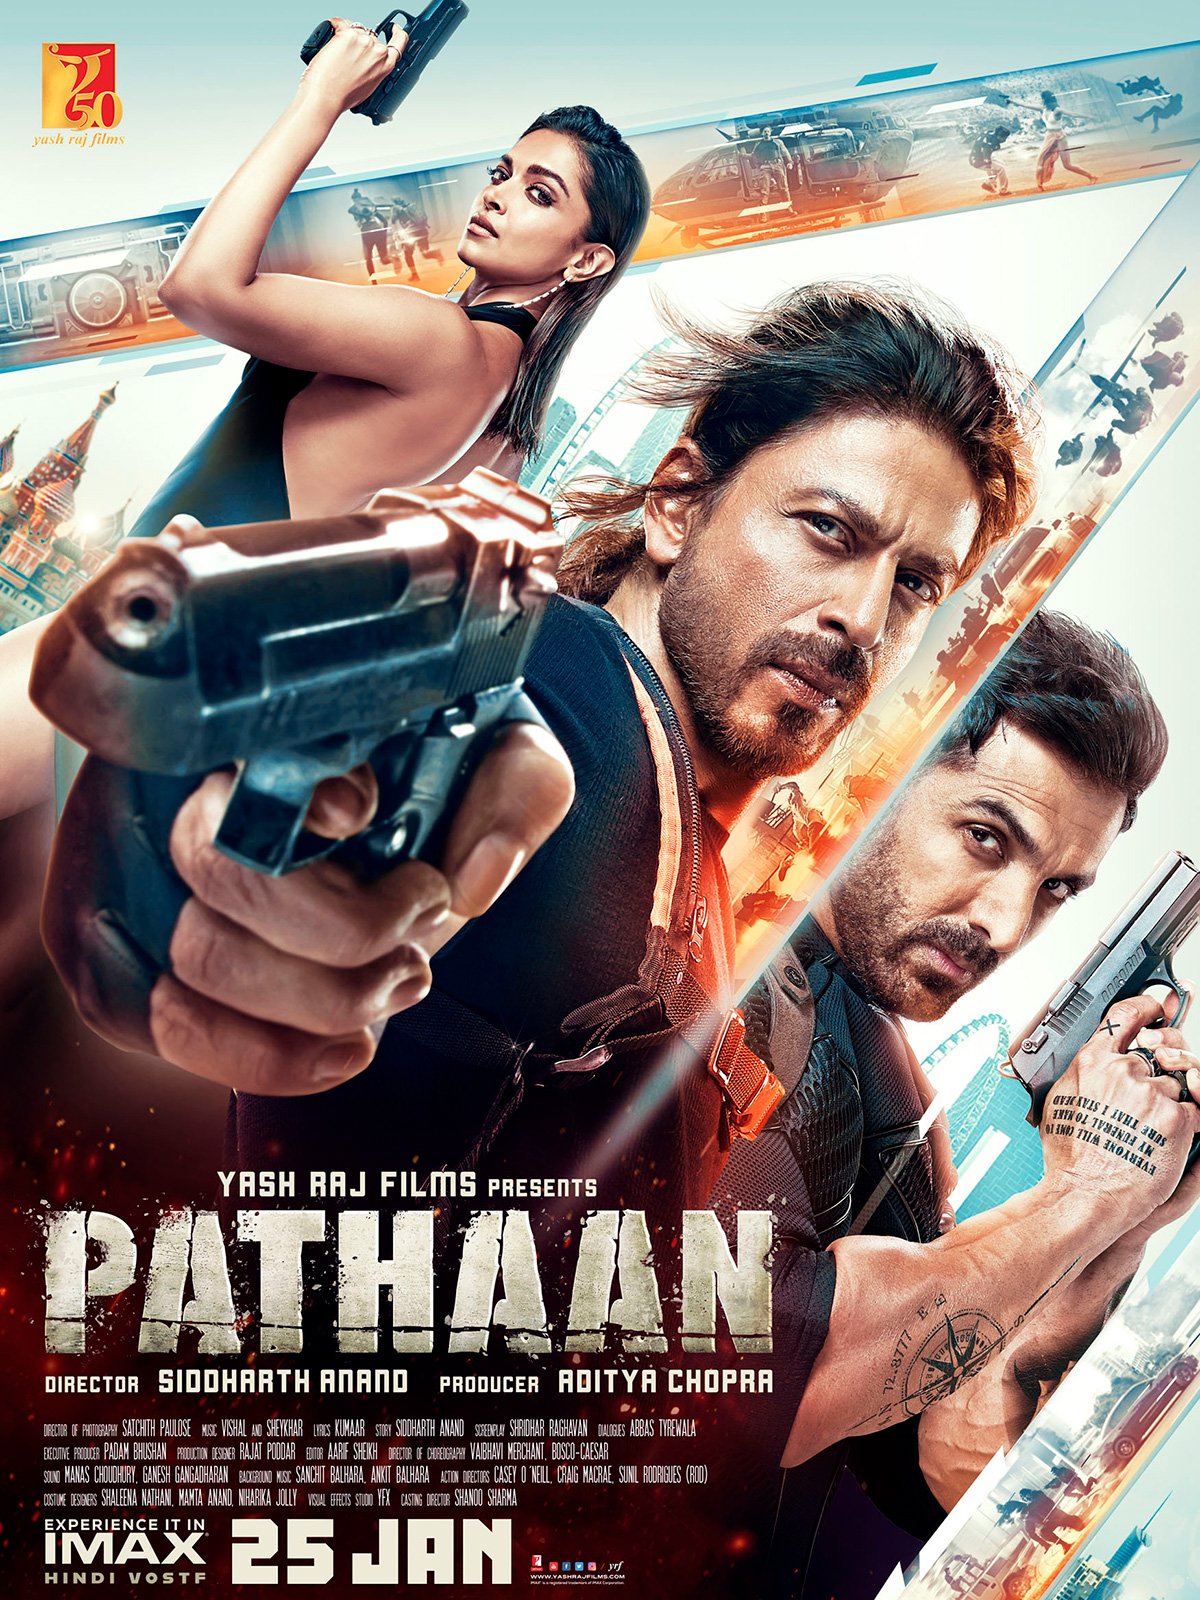 pathan movie review 2023